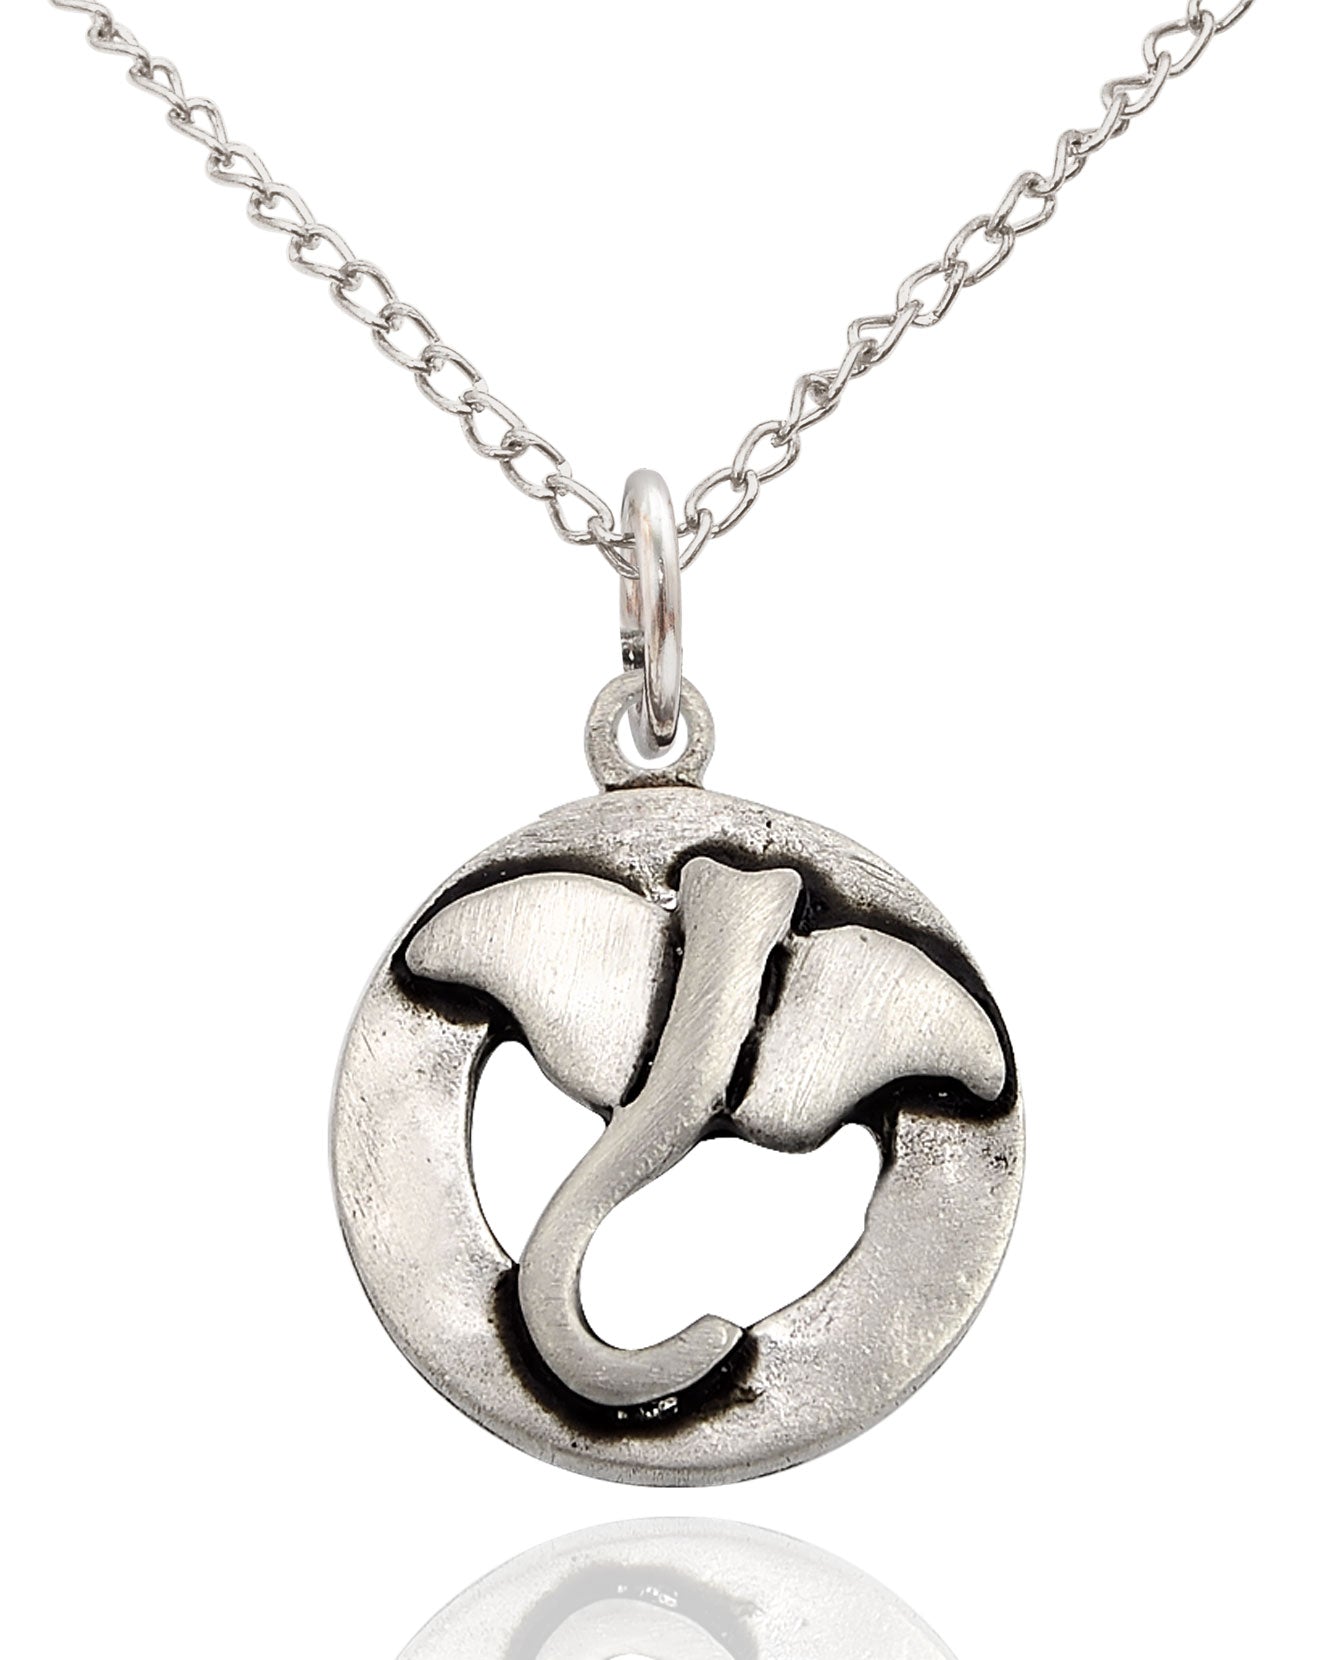 New Stingray Silver Pewter Gold Brass Charm Necklace Pendant Jewelry